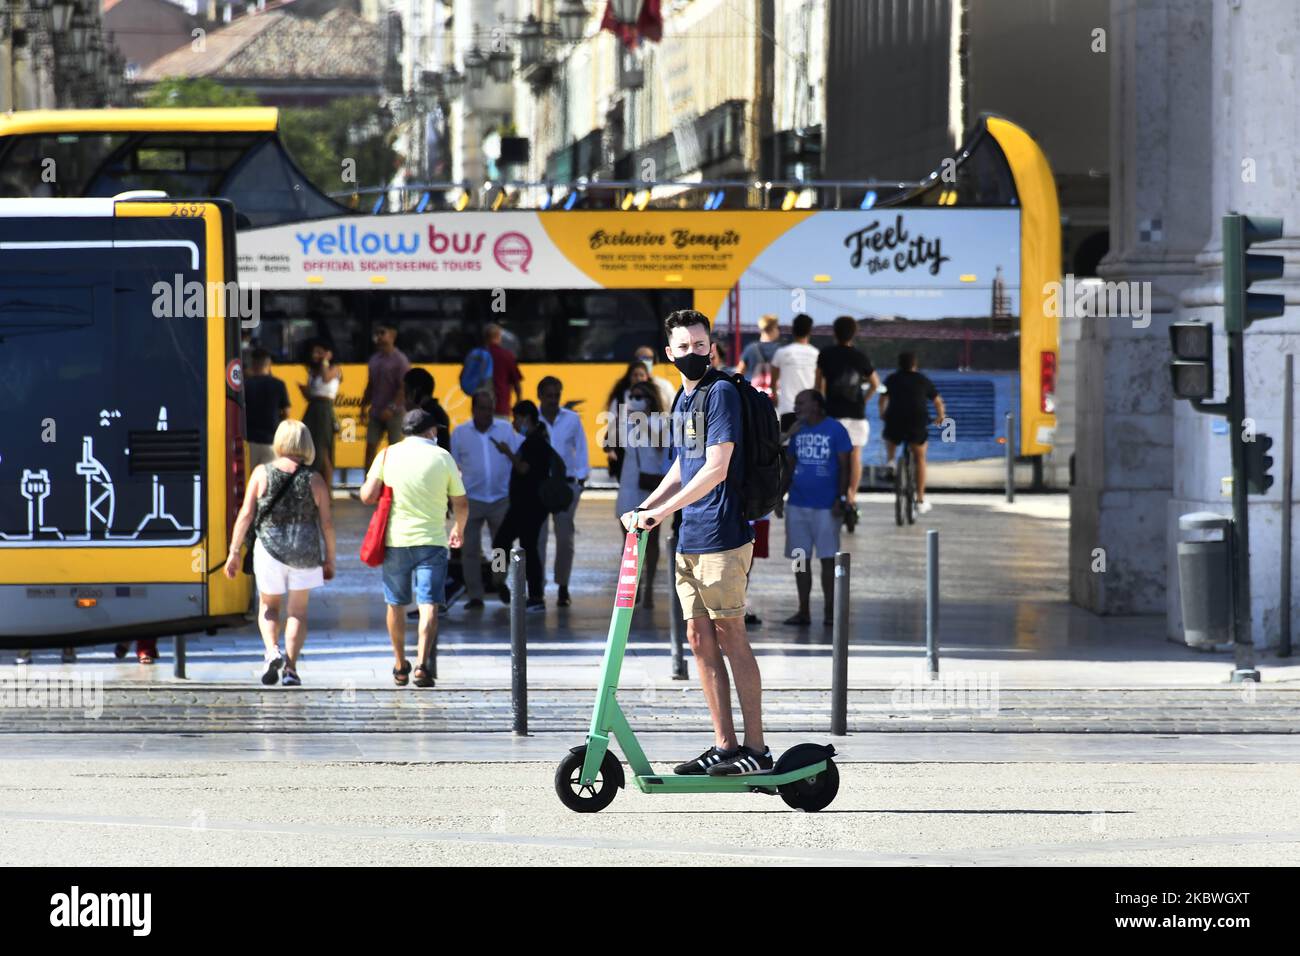 A man wearing protective masks ride scooter in Praça de Comércio, Lisbon. July 31th, 2020. Health Minister Marta Temido reported that there are 12,864 active cases of COVID-19 disease in Portugal, including outbreak-related infections. In total there are 194 active outbreaks in the country: 47 in the North region, 12 in the Centre, 106 in Lisbon and Tagus Valley, 14 in the Alentejo and 15 in the Algarve region. The outbreaks are considered active even if several days have passed since the last confirmed case. 'We only consider an outbreak to be extinct when 28 days (two incubation periods) hav Stock Photo